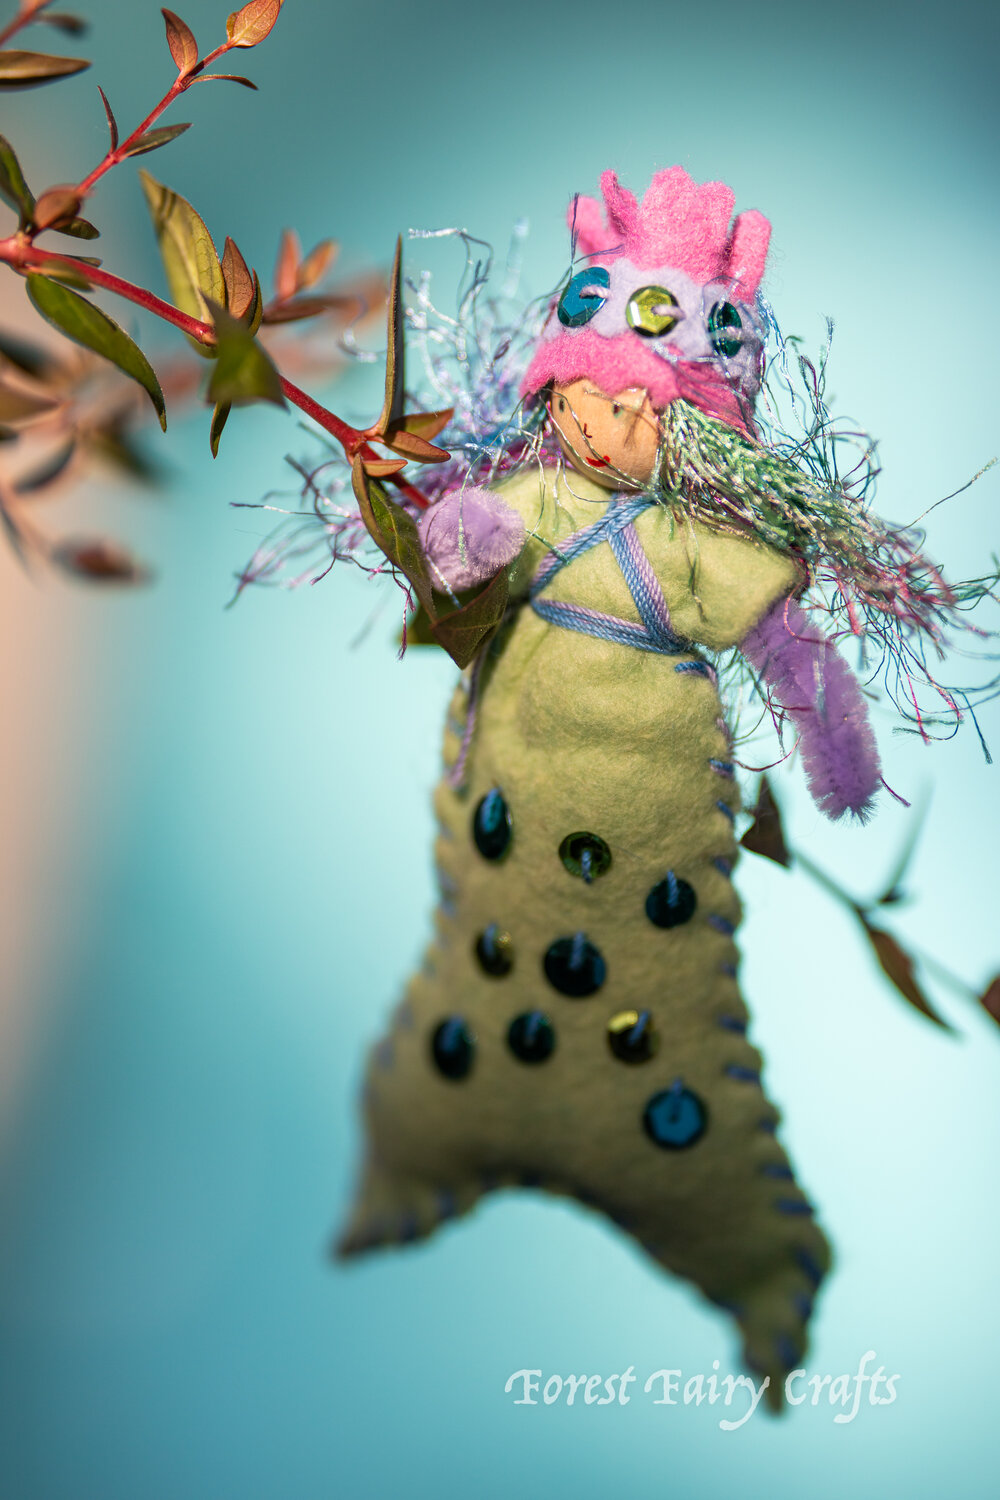 Summer Mermaid by Lenka Vodicka of Forest Fairy Crafts by Lenka Vodicka-Paredes and Asia Currie